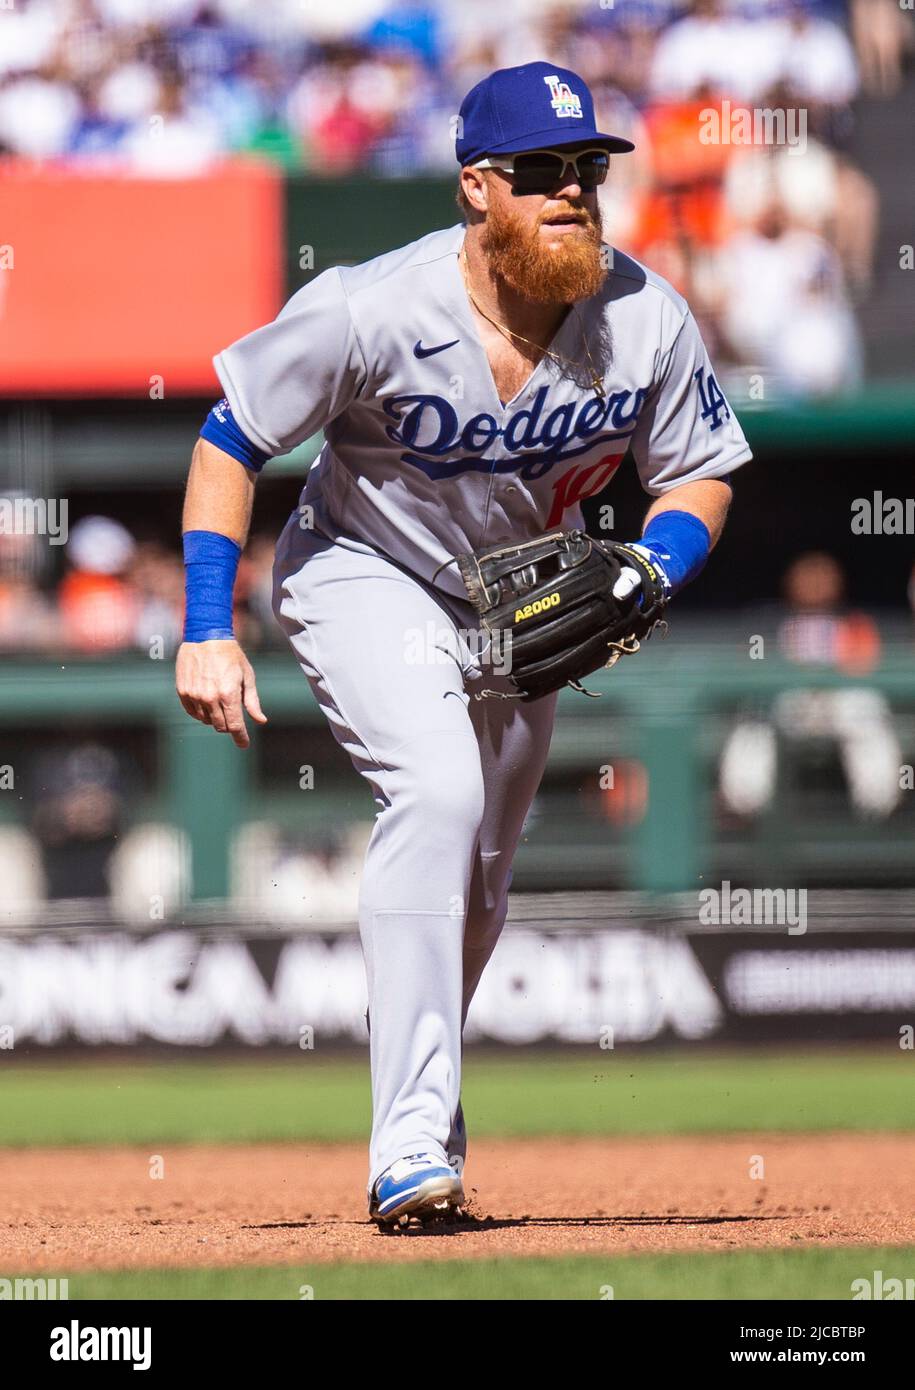 June 11 2022 San Francisco CA, U.S.A. Los Angeles third baseman Justin  Turner (10) ready to make an infield play during the MLB game between the  Los Angeles Dodgers and the San